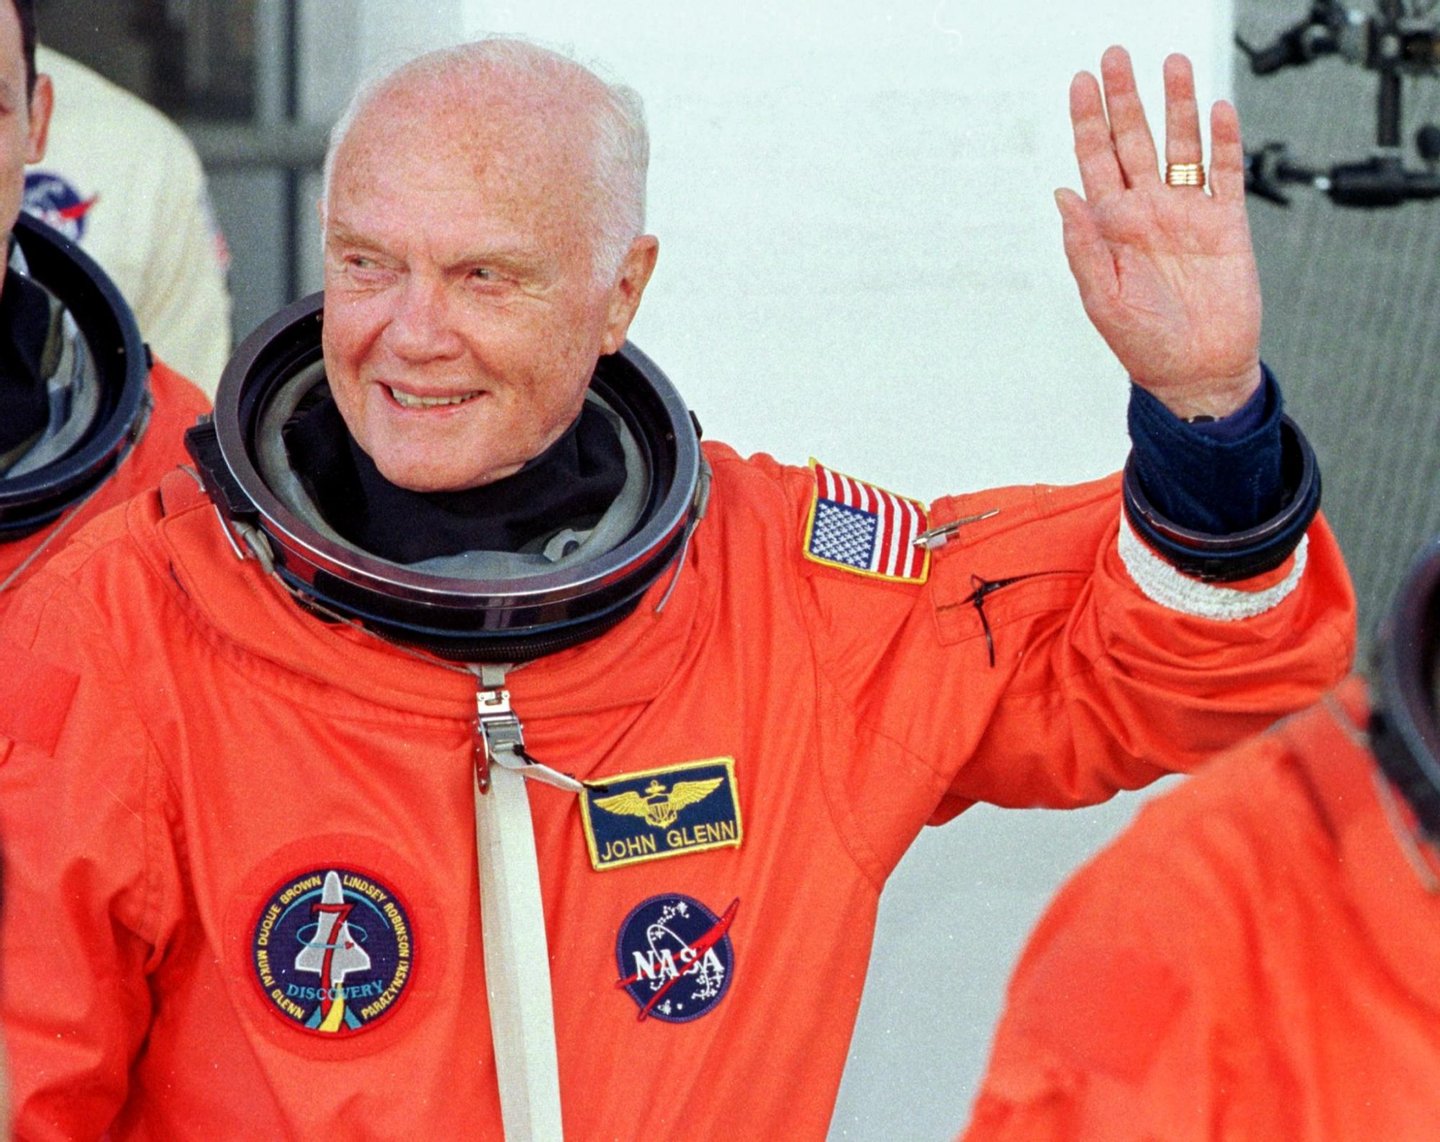 KENNEDY SPACE CENTER, UNITED STATES: US astronaut and senator John Glenn waves as he leaves the Operations and Check out building at the Kennedy Space Center, FL, 29 October in route to board the US space shuttle Discovery. The seven person crew will perform several scientific experiments during their nine day mission, including studies on the effects of weightlessness on 77-year-old Glenn. Glenn who is 77 years old will be the oldest man to fly into space. AFP PHOTO Roberto SCHMIDT (Photo credit should read ROBERTO SCHMIDT/AFP/Getty Images)